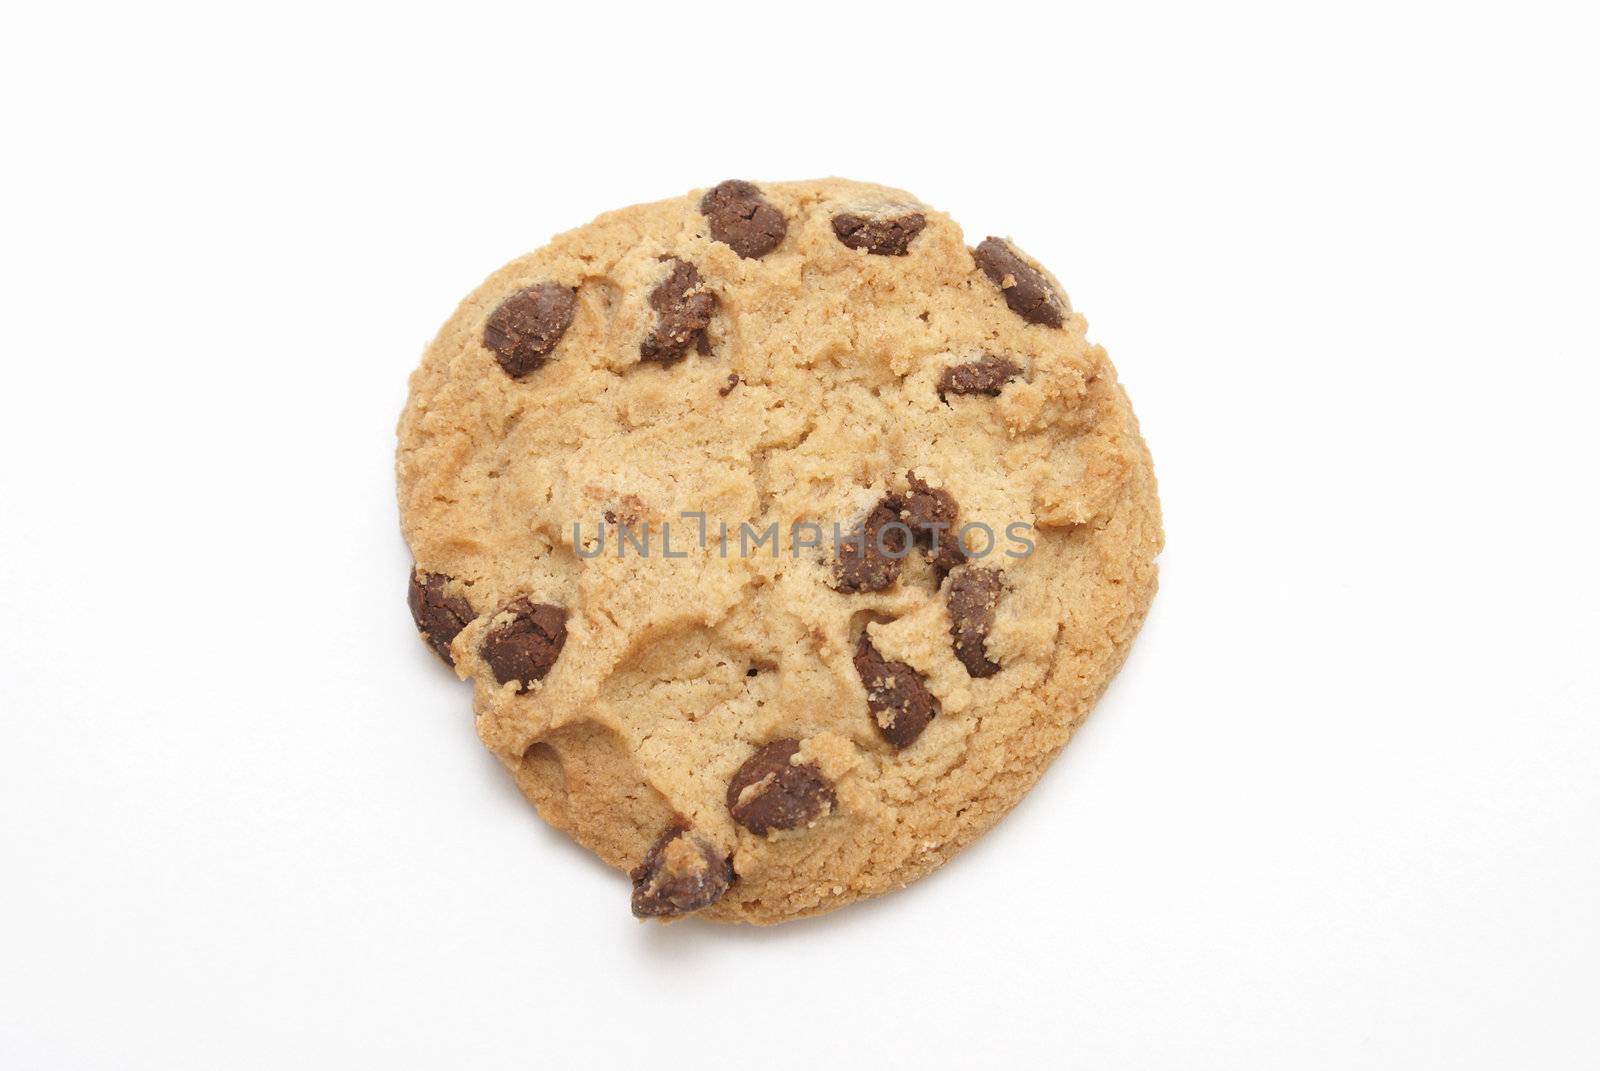 An isolated oven baked chocolate chip cookie.